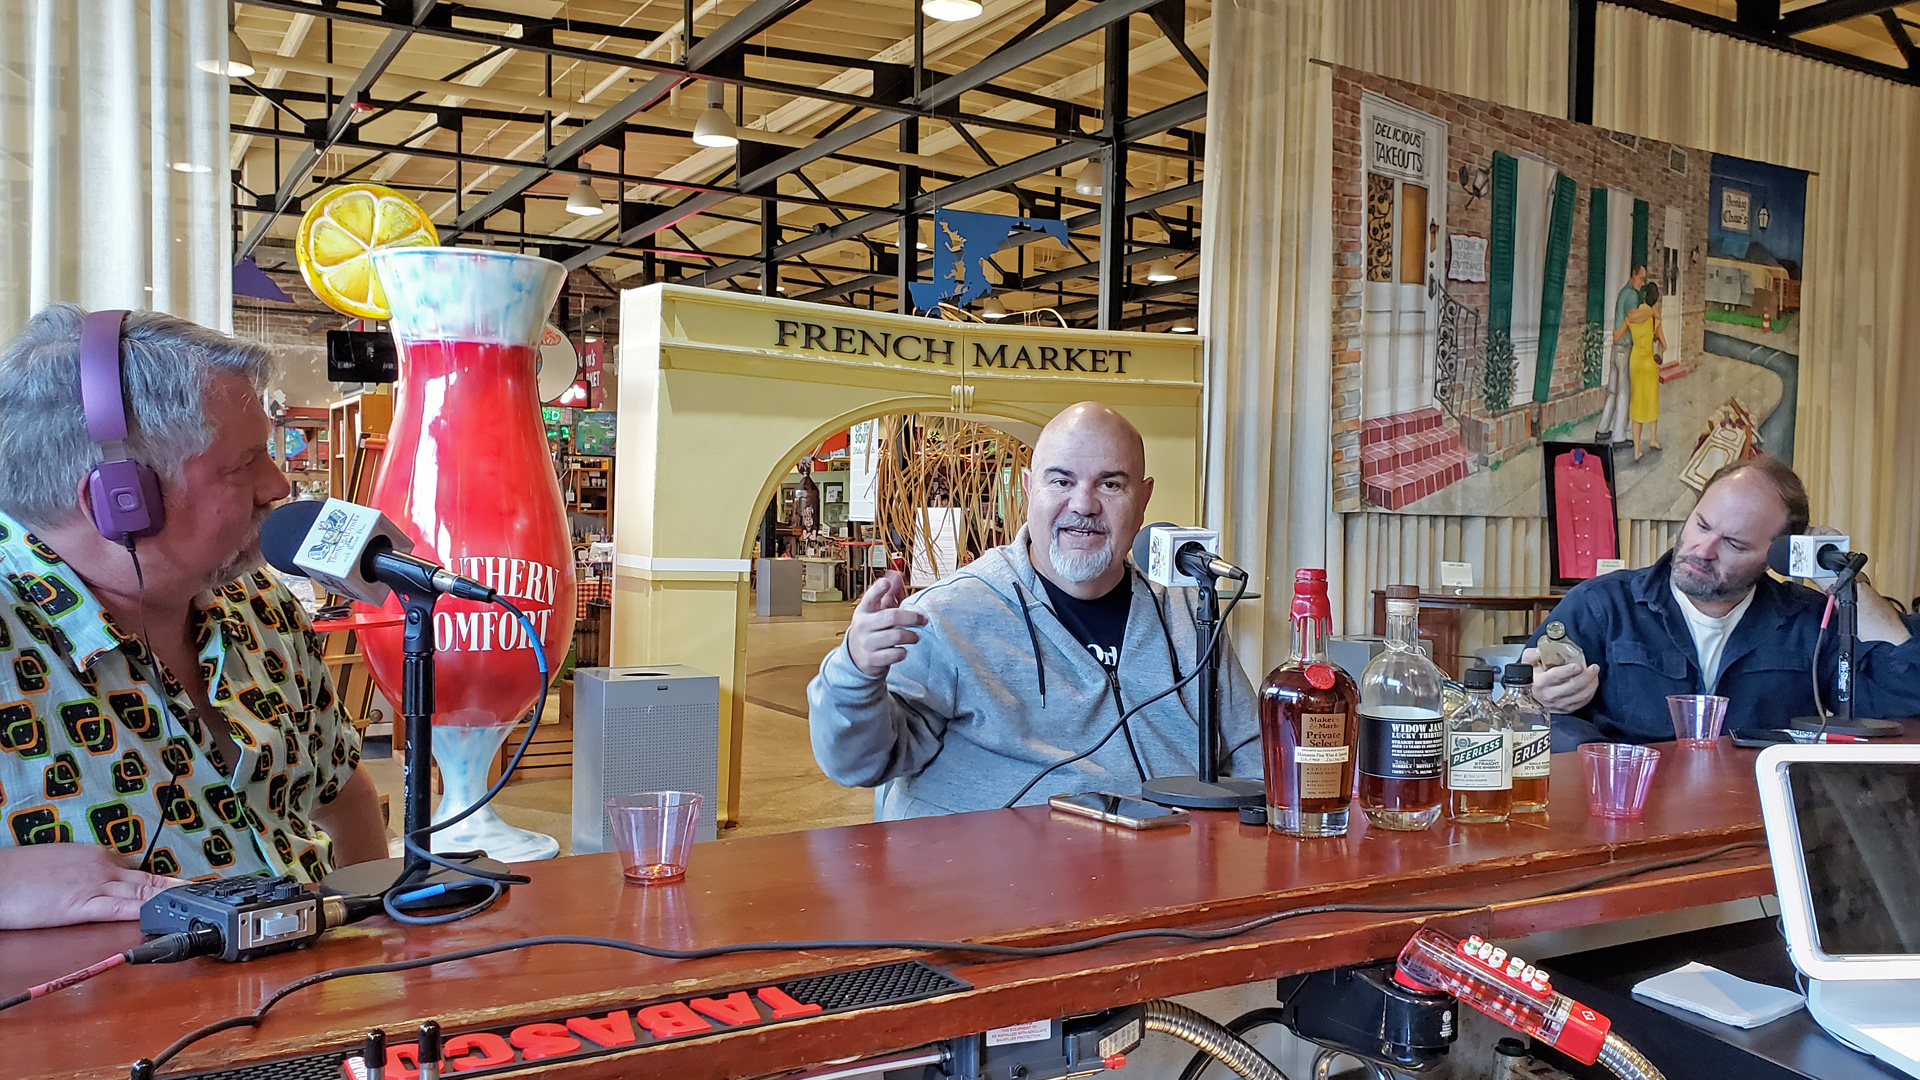 The NOLADrinks Show with Bryan Dias - Year of American Whiskey - 2022Ep2 – Bryan Dias of The NOLADrinks Show, Tracy Napolitano of New Orleans Bourbon Festival, and Brent Rosen of the Southern Food and Beverage Museum.